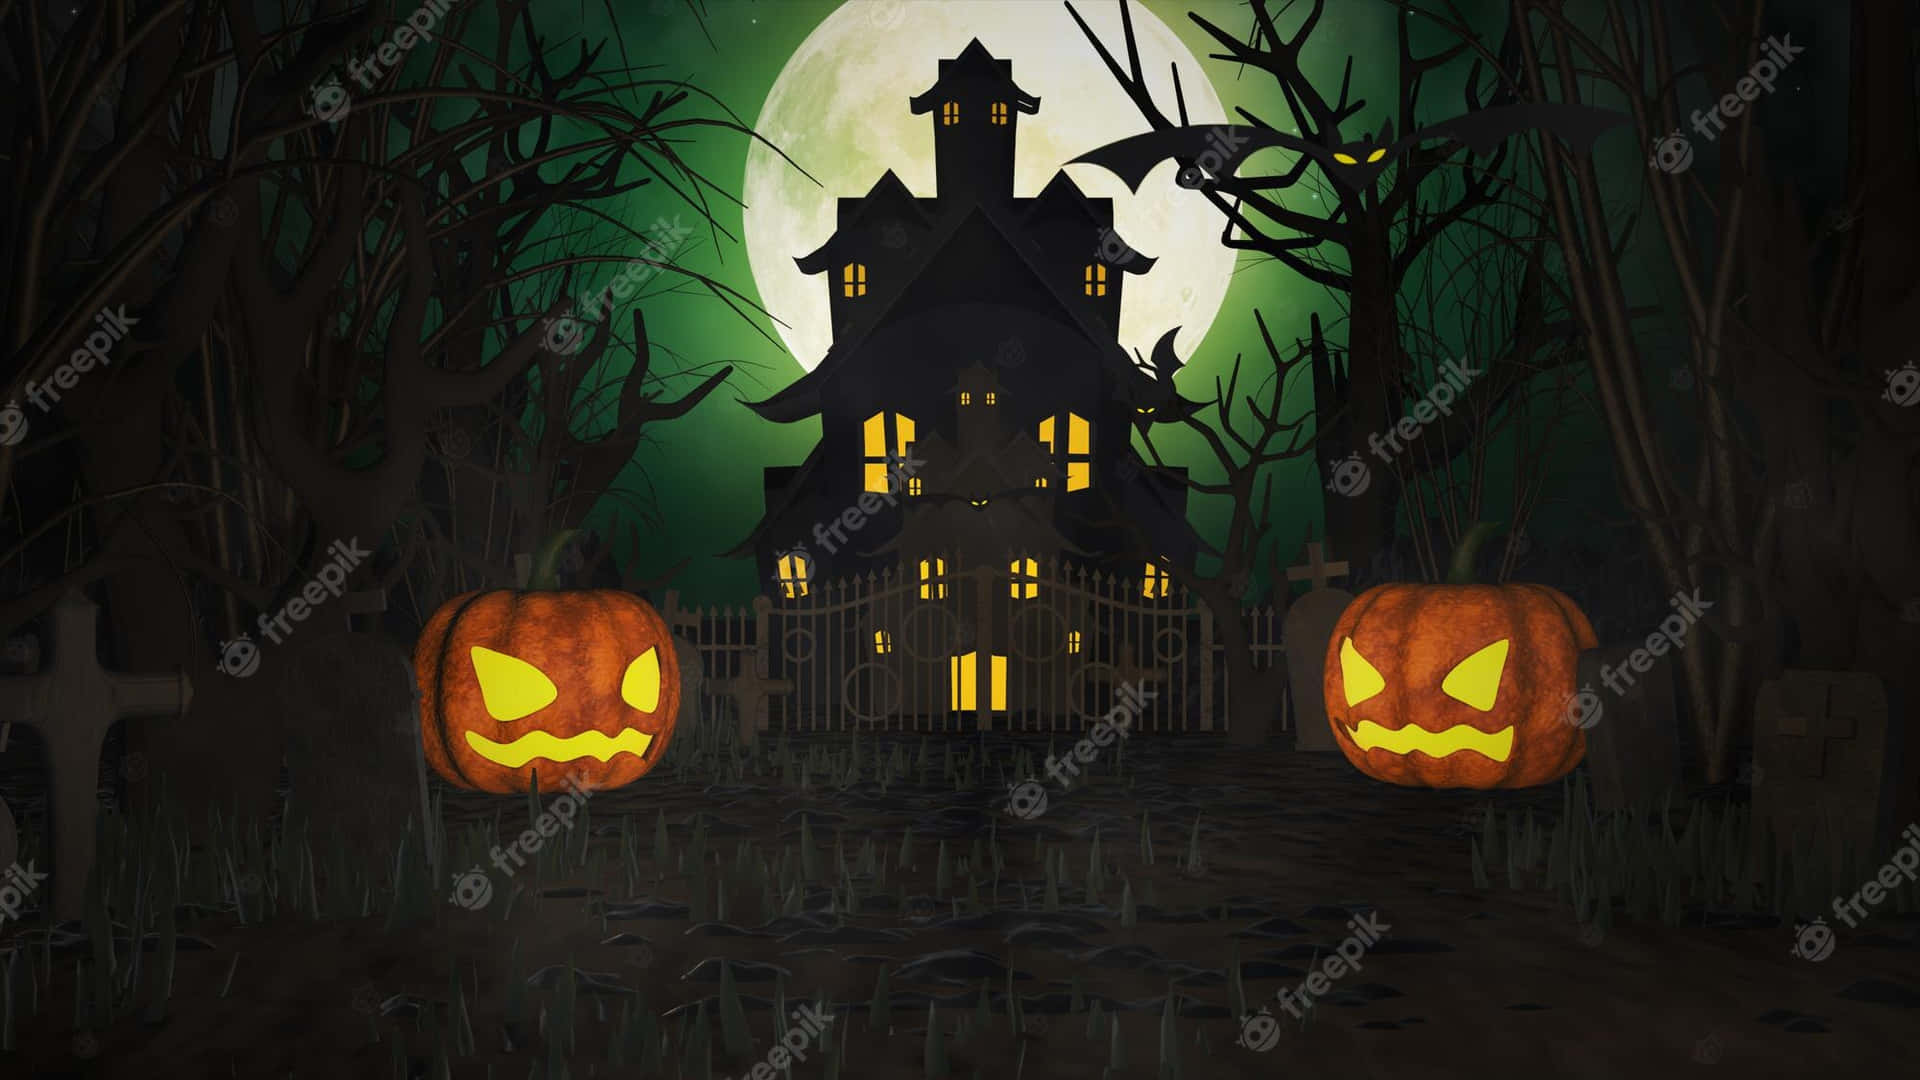 Halloween House With Pumpkins And A Full Moon Wallpaper